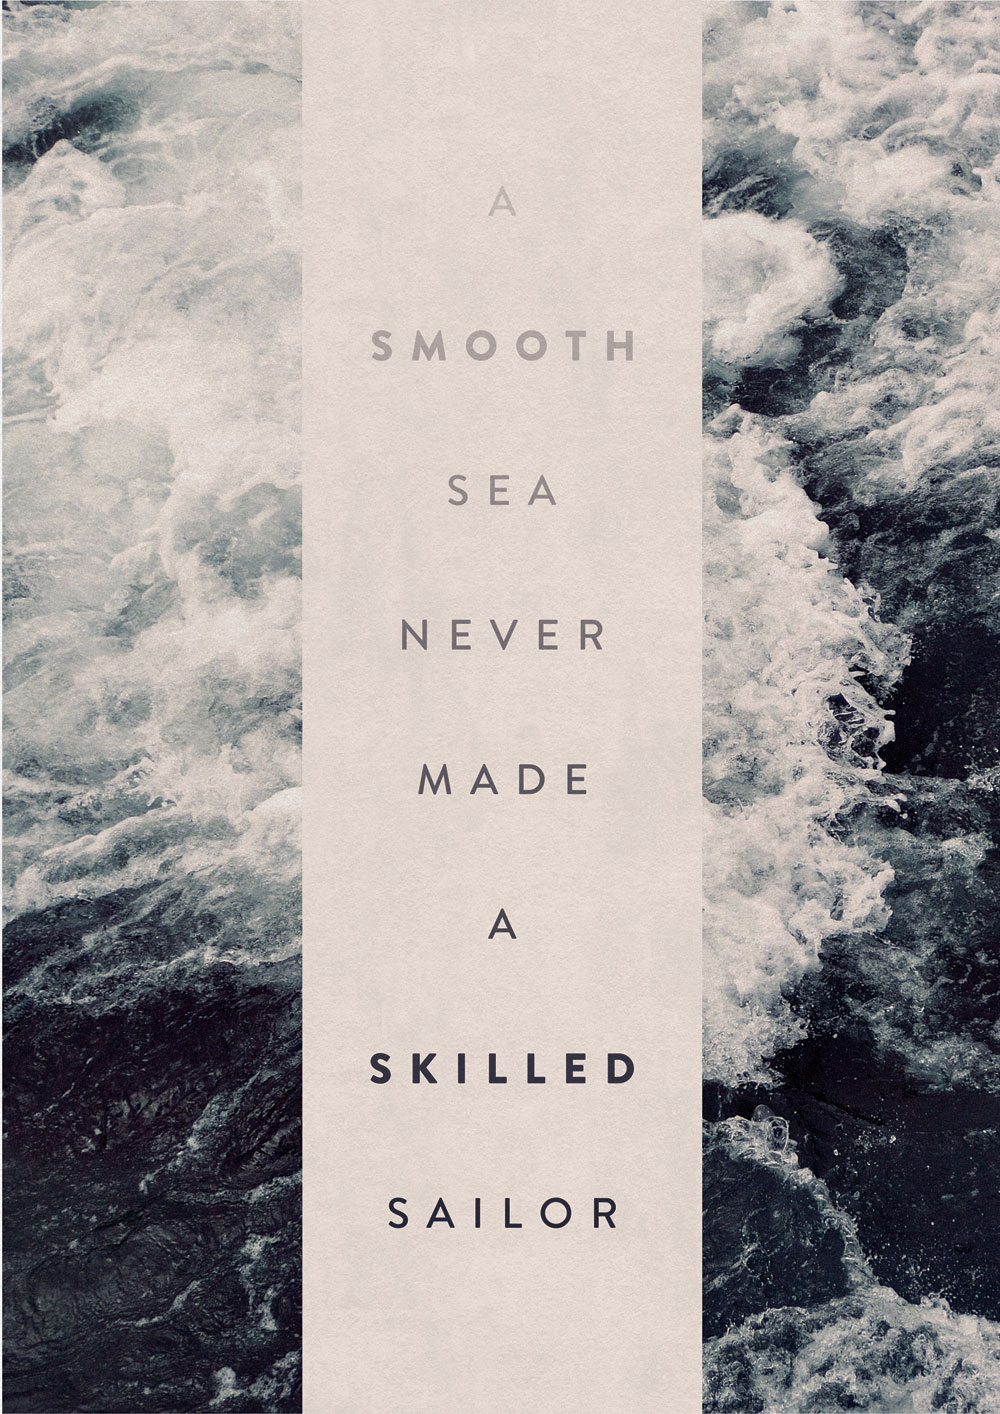 A Smooth Sea Never Made A Skilled Sailor. By Oliver Shilling